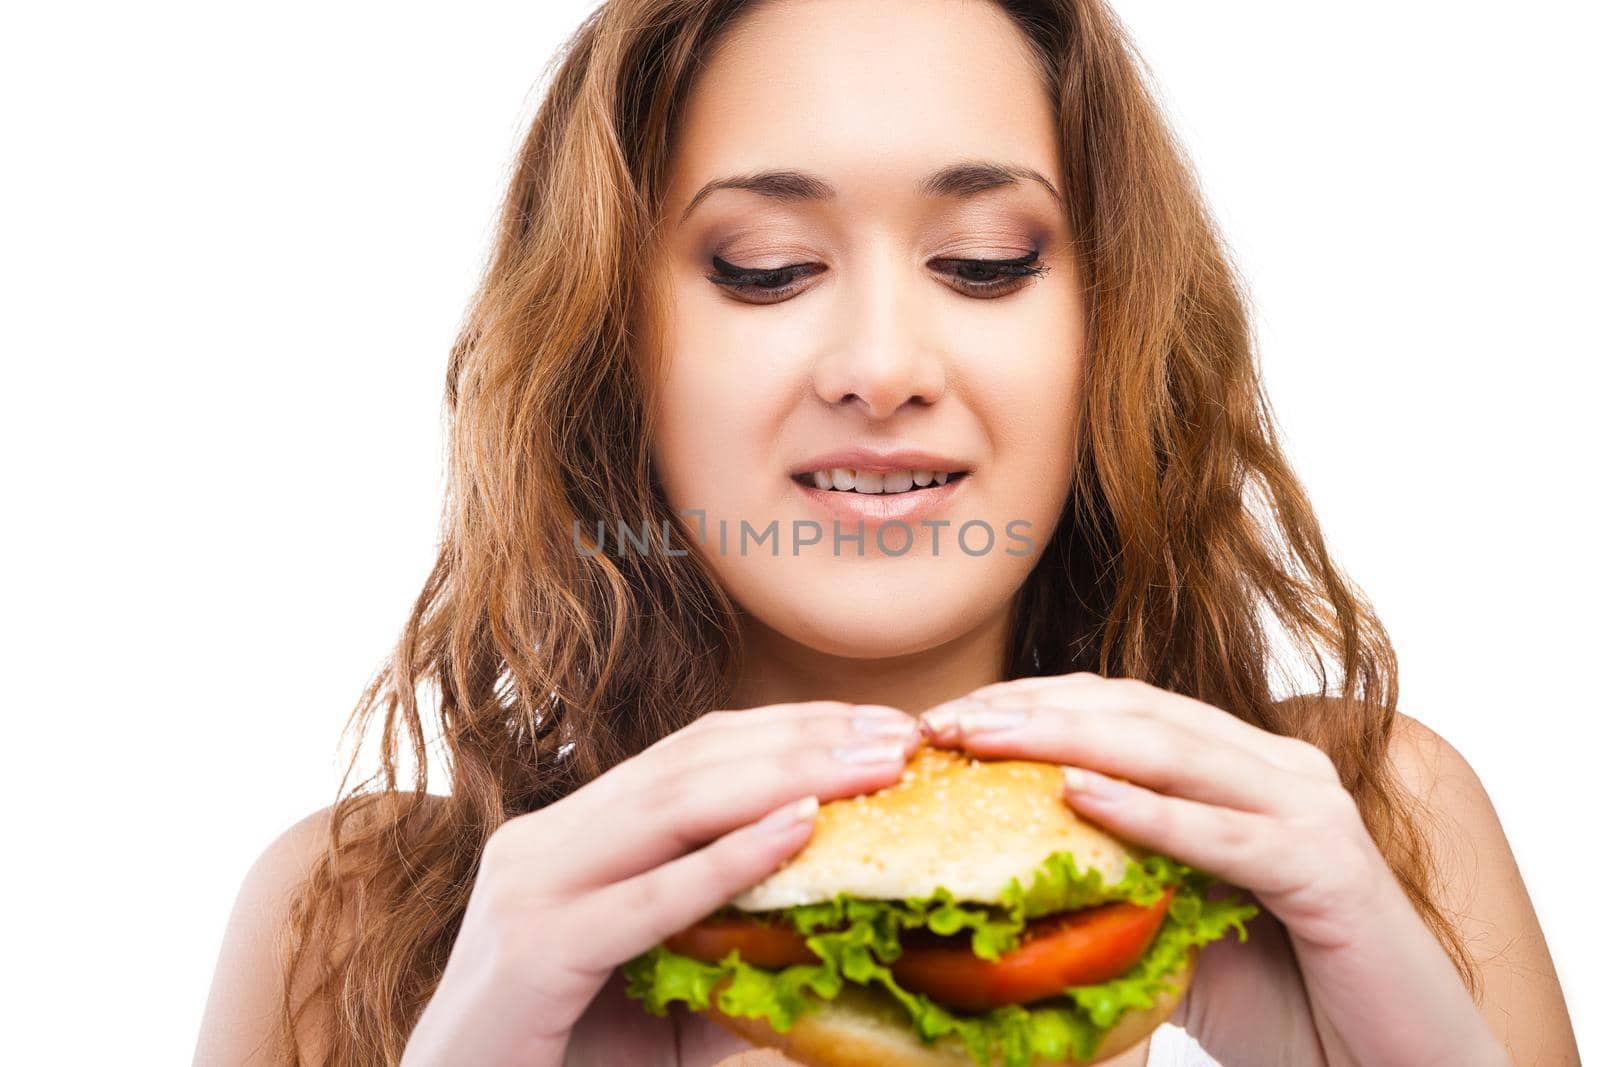 Happy Young Woman Eating big yummy Burger isolated on white background